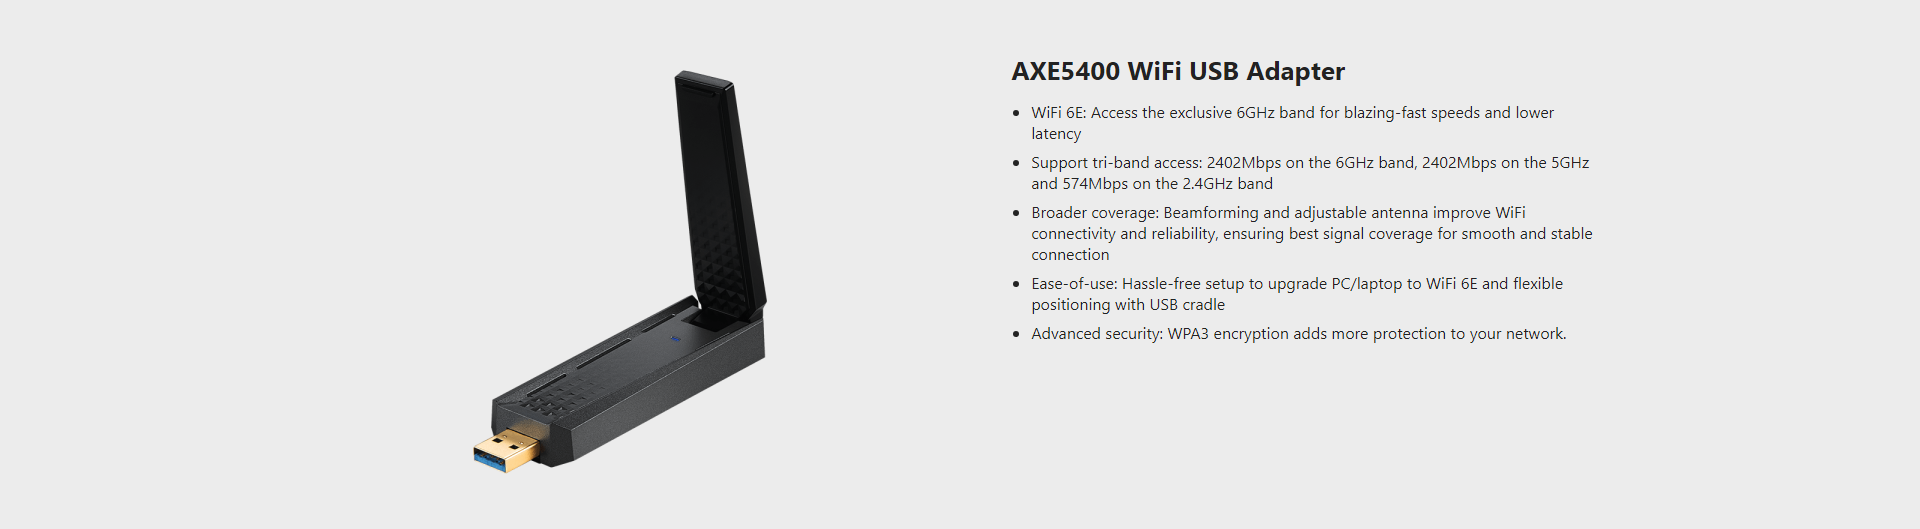 A large marketing image providing additional information about the product MSI GUAXE54 AXE5400 Tri-Band Wireless USB Adapter - Additional alt info not provided